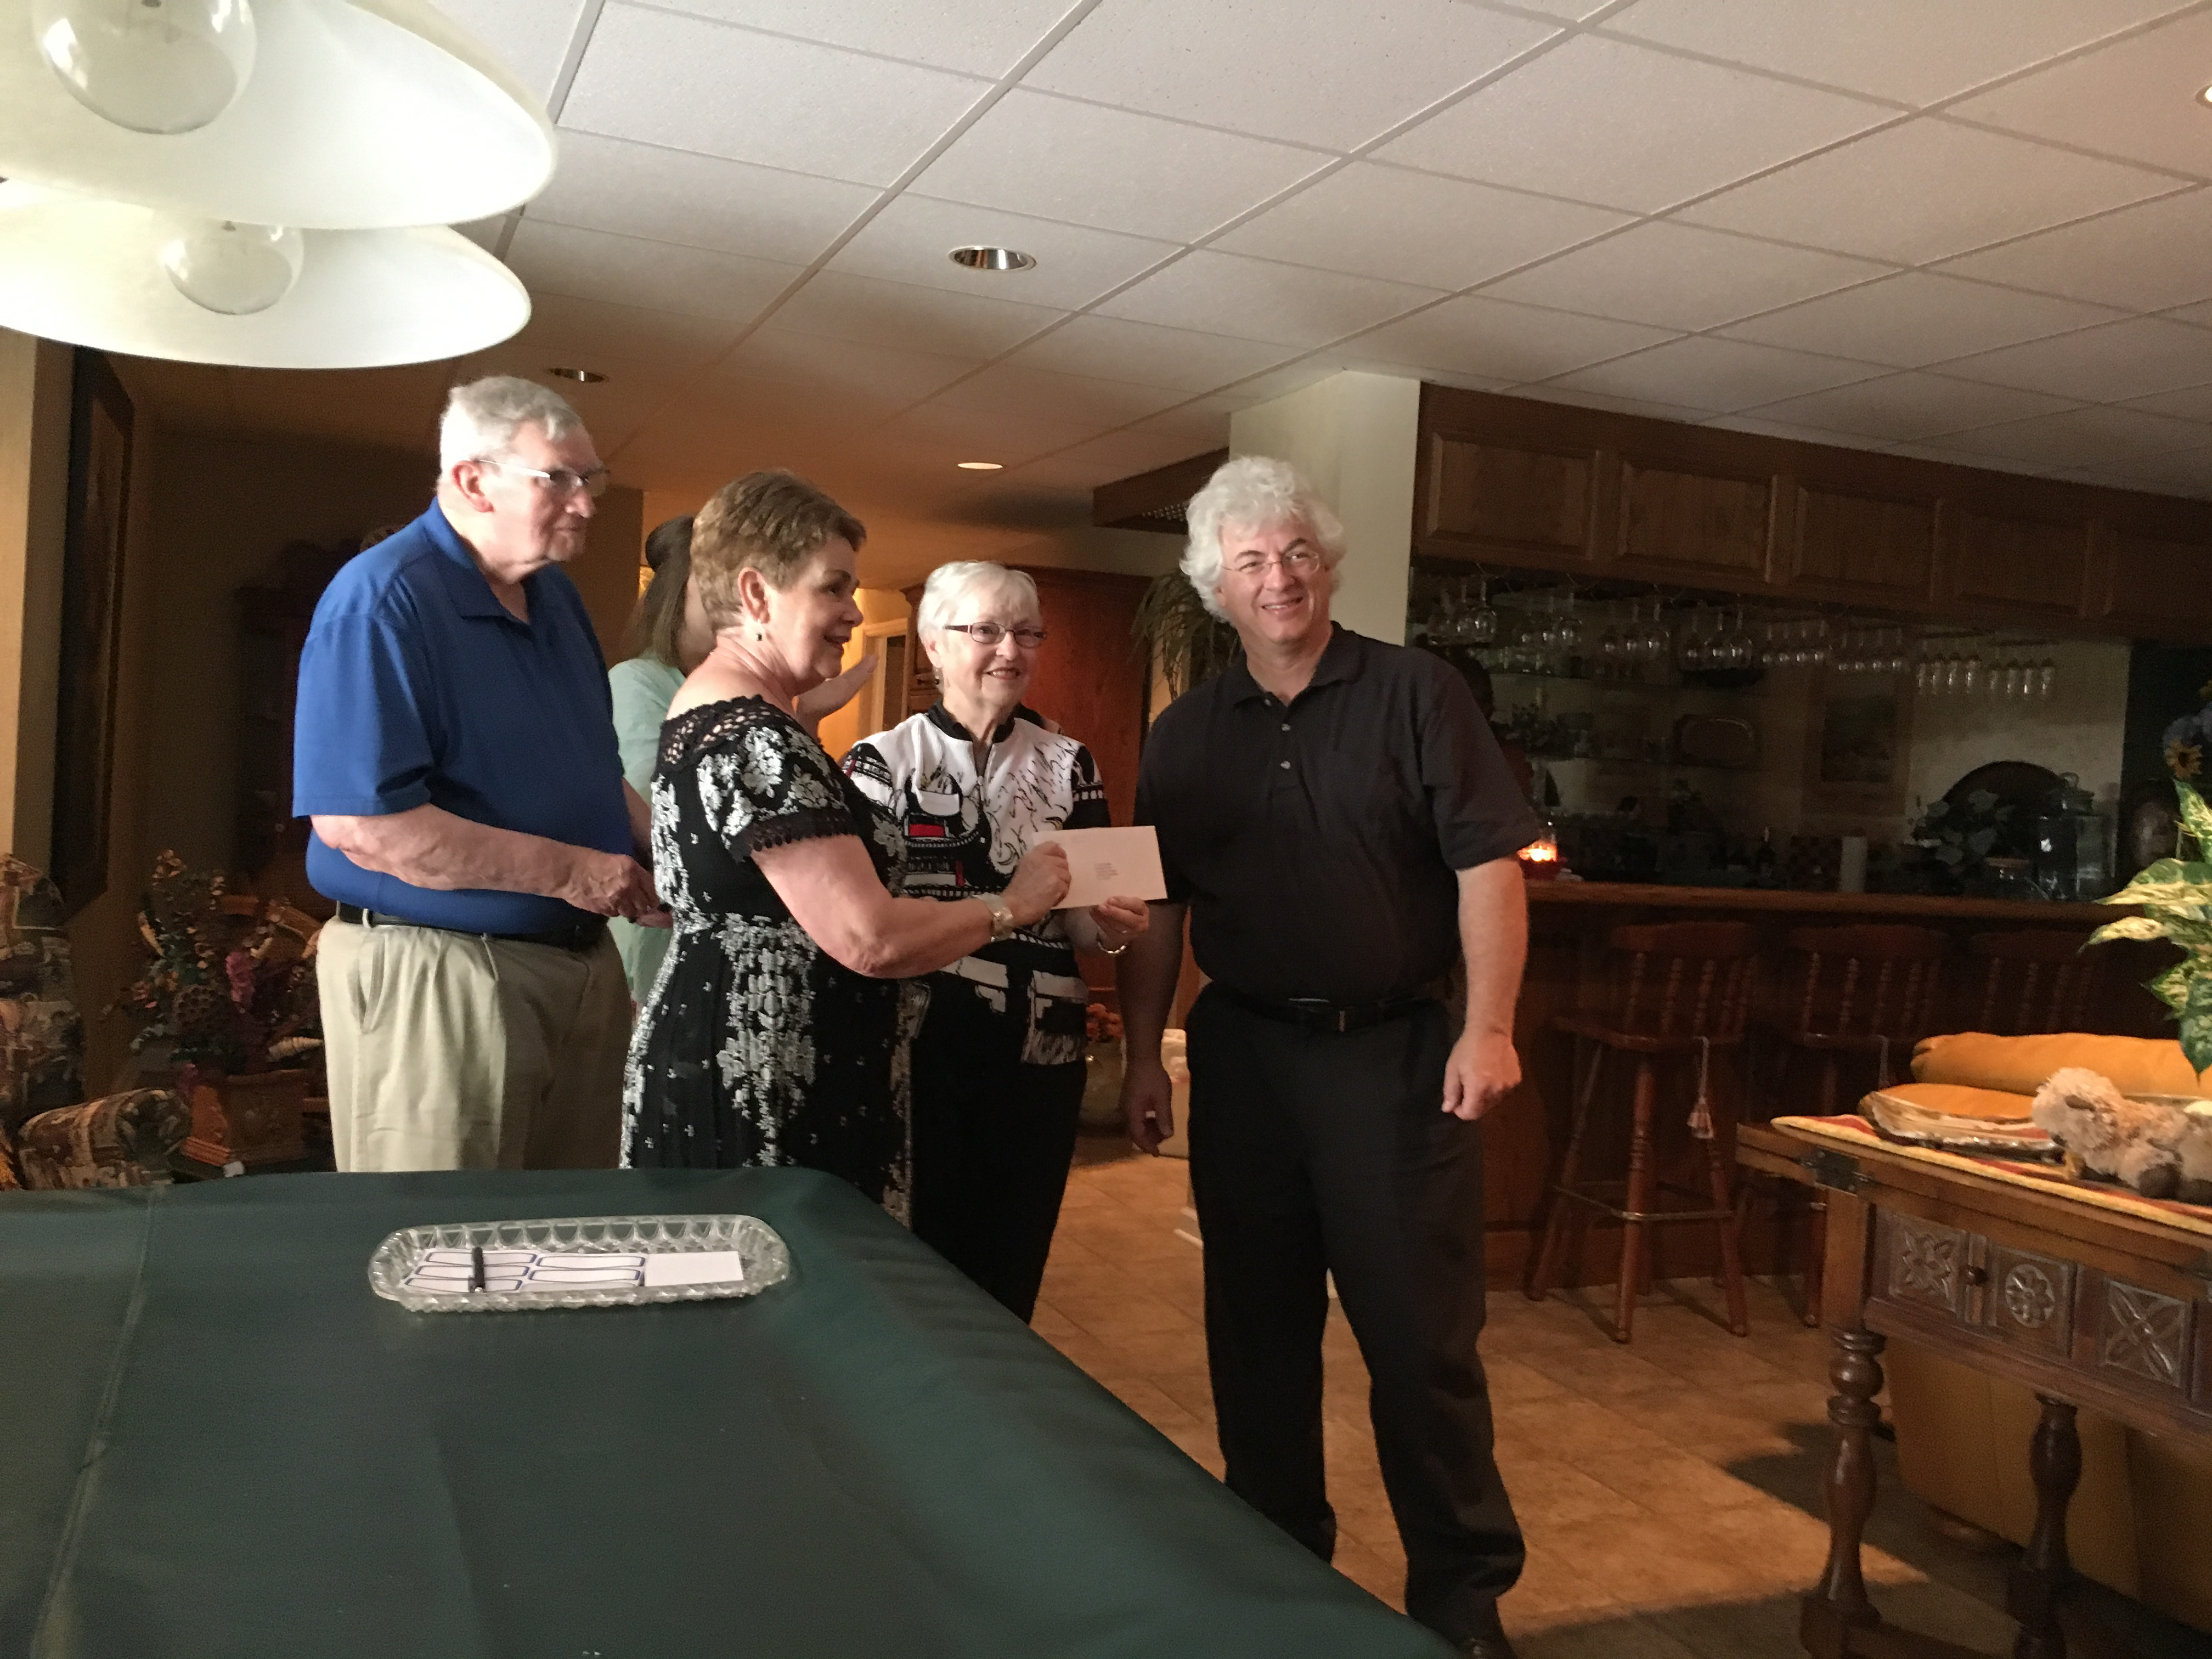 Sharon Matheny, president of the Montgomery County Fund, presents a grant check to Paul Chandley, director of the Trinity Music Academy, and Deloris Lassiter, president of the Trinity Music Academy board. Also pictured: Jim Matheny. The grant will fund scholarships for children's music lessons.